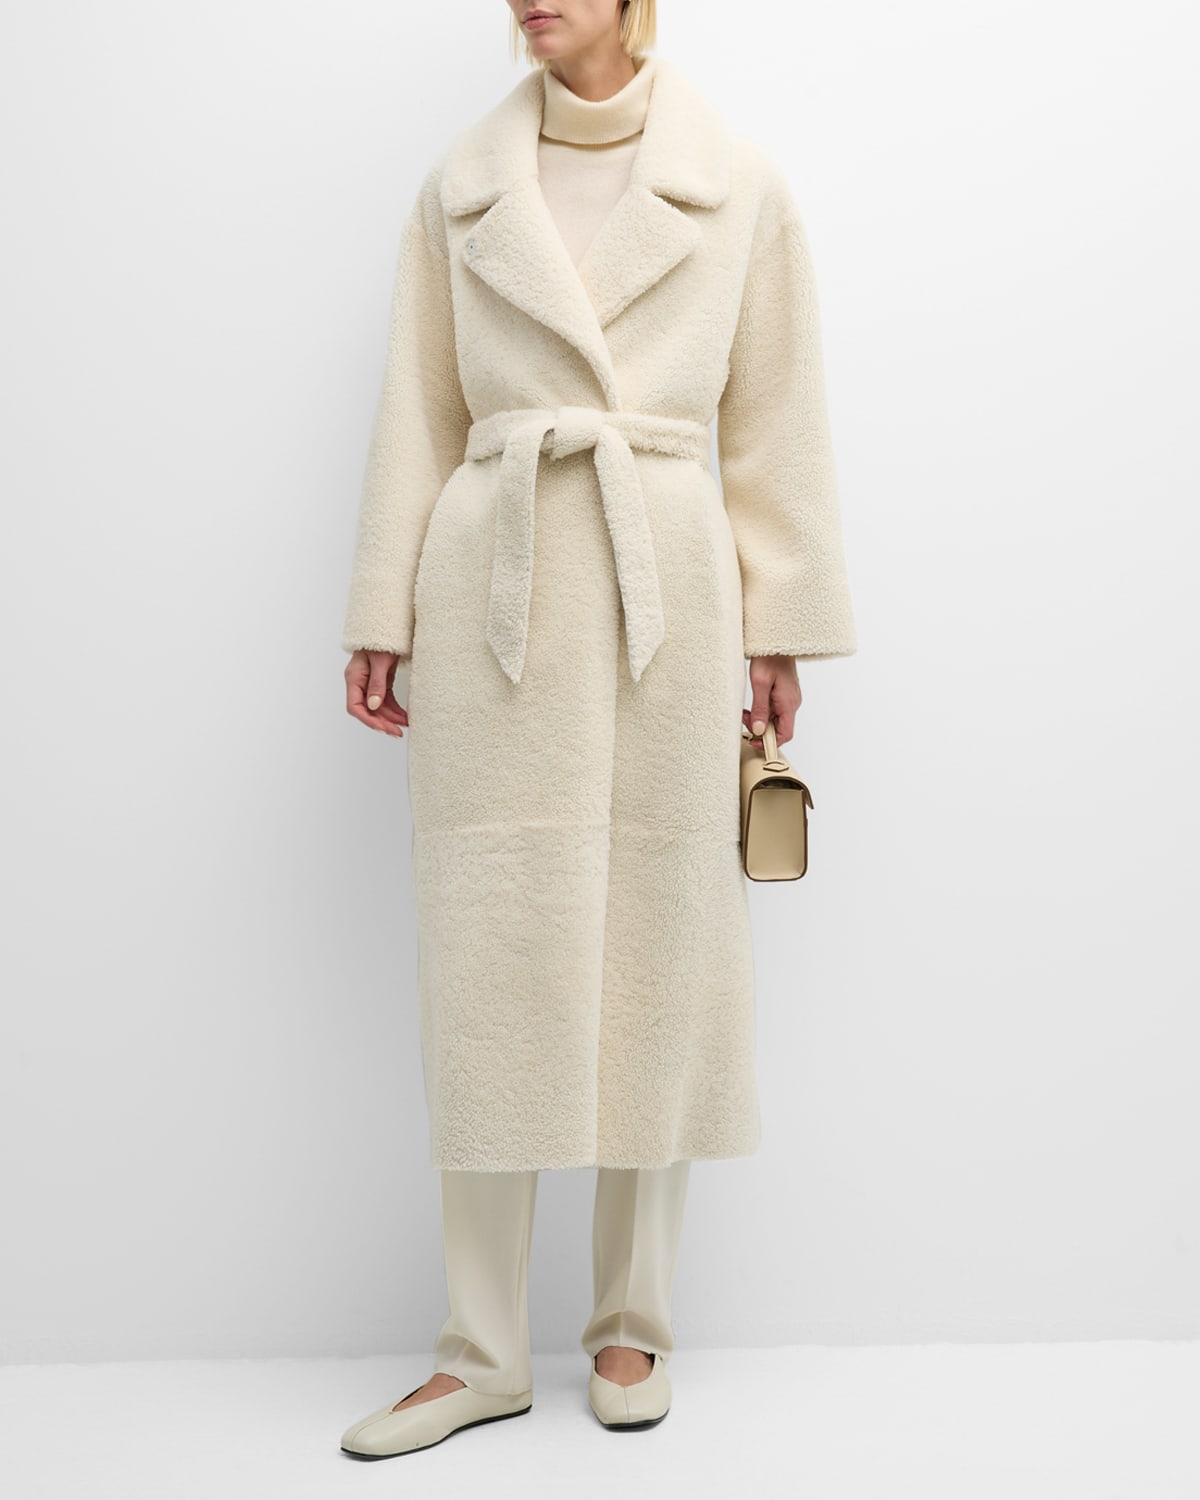 Oversized Shearling Trench Coat